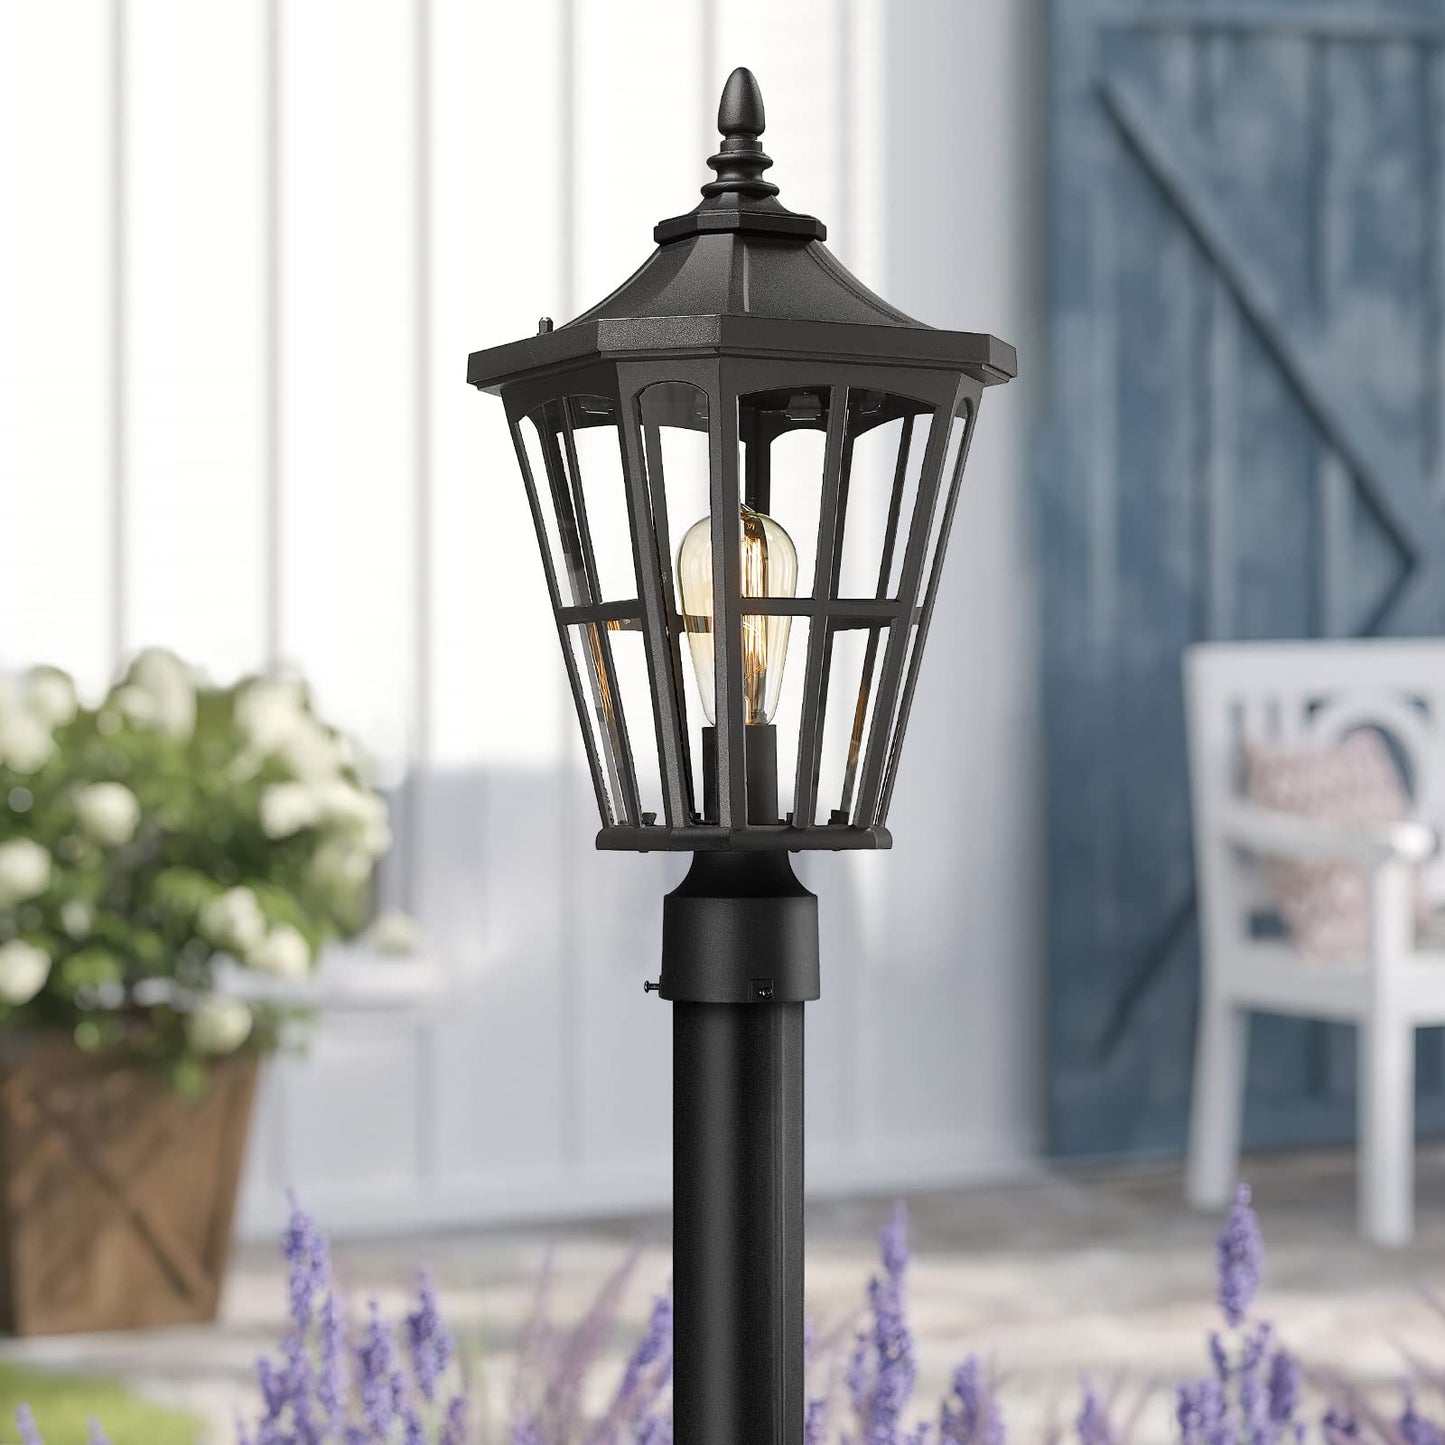 
                  
                    Emliviar Outdoor Lamp Post Light Fixture - 19 Inch Large Post Lantern Light, Black Finish with Clear Glass, XE221P BK
                  
                